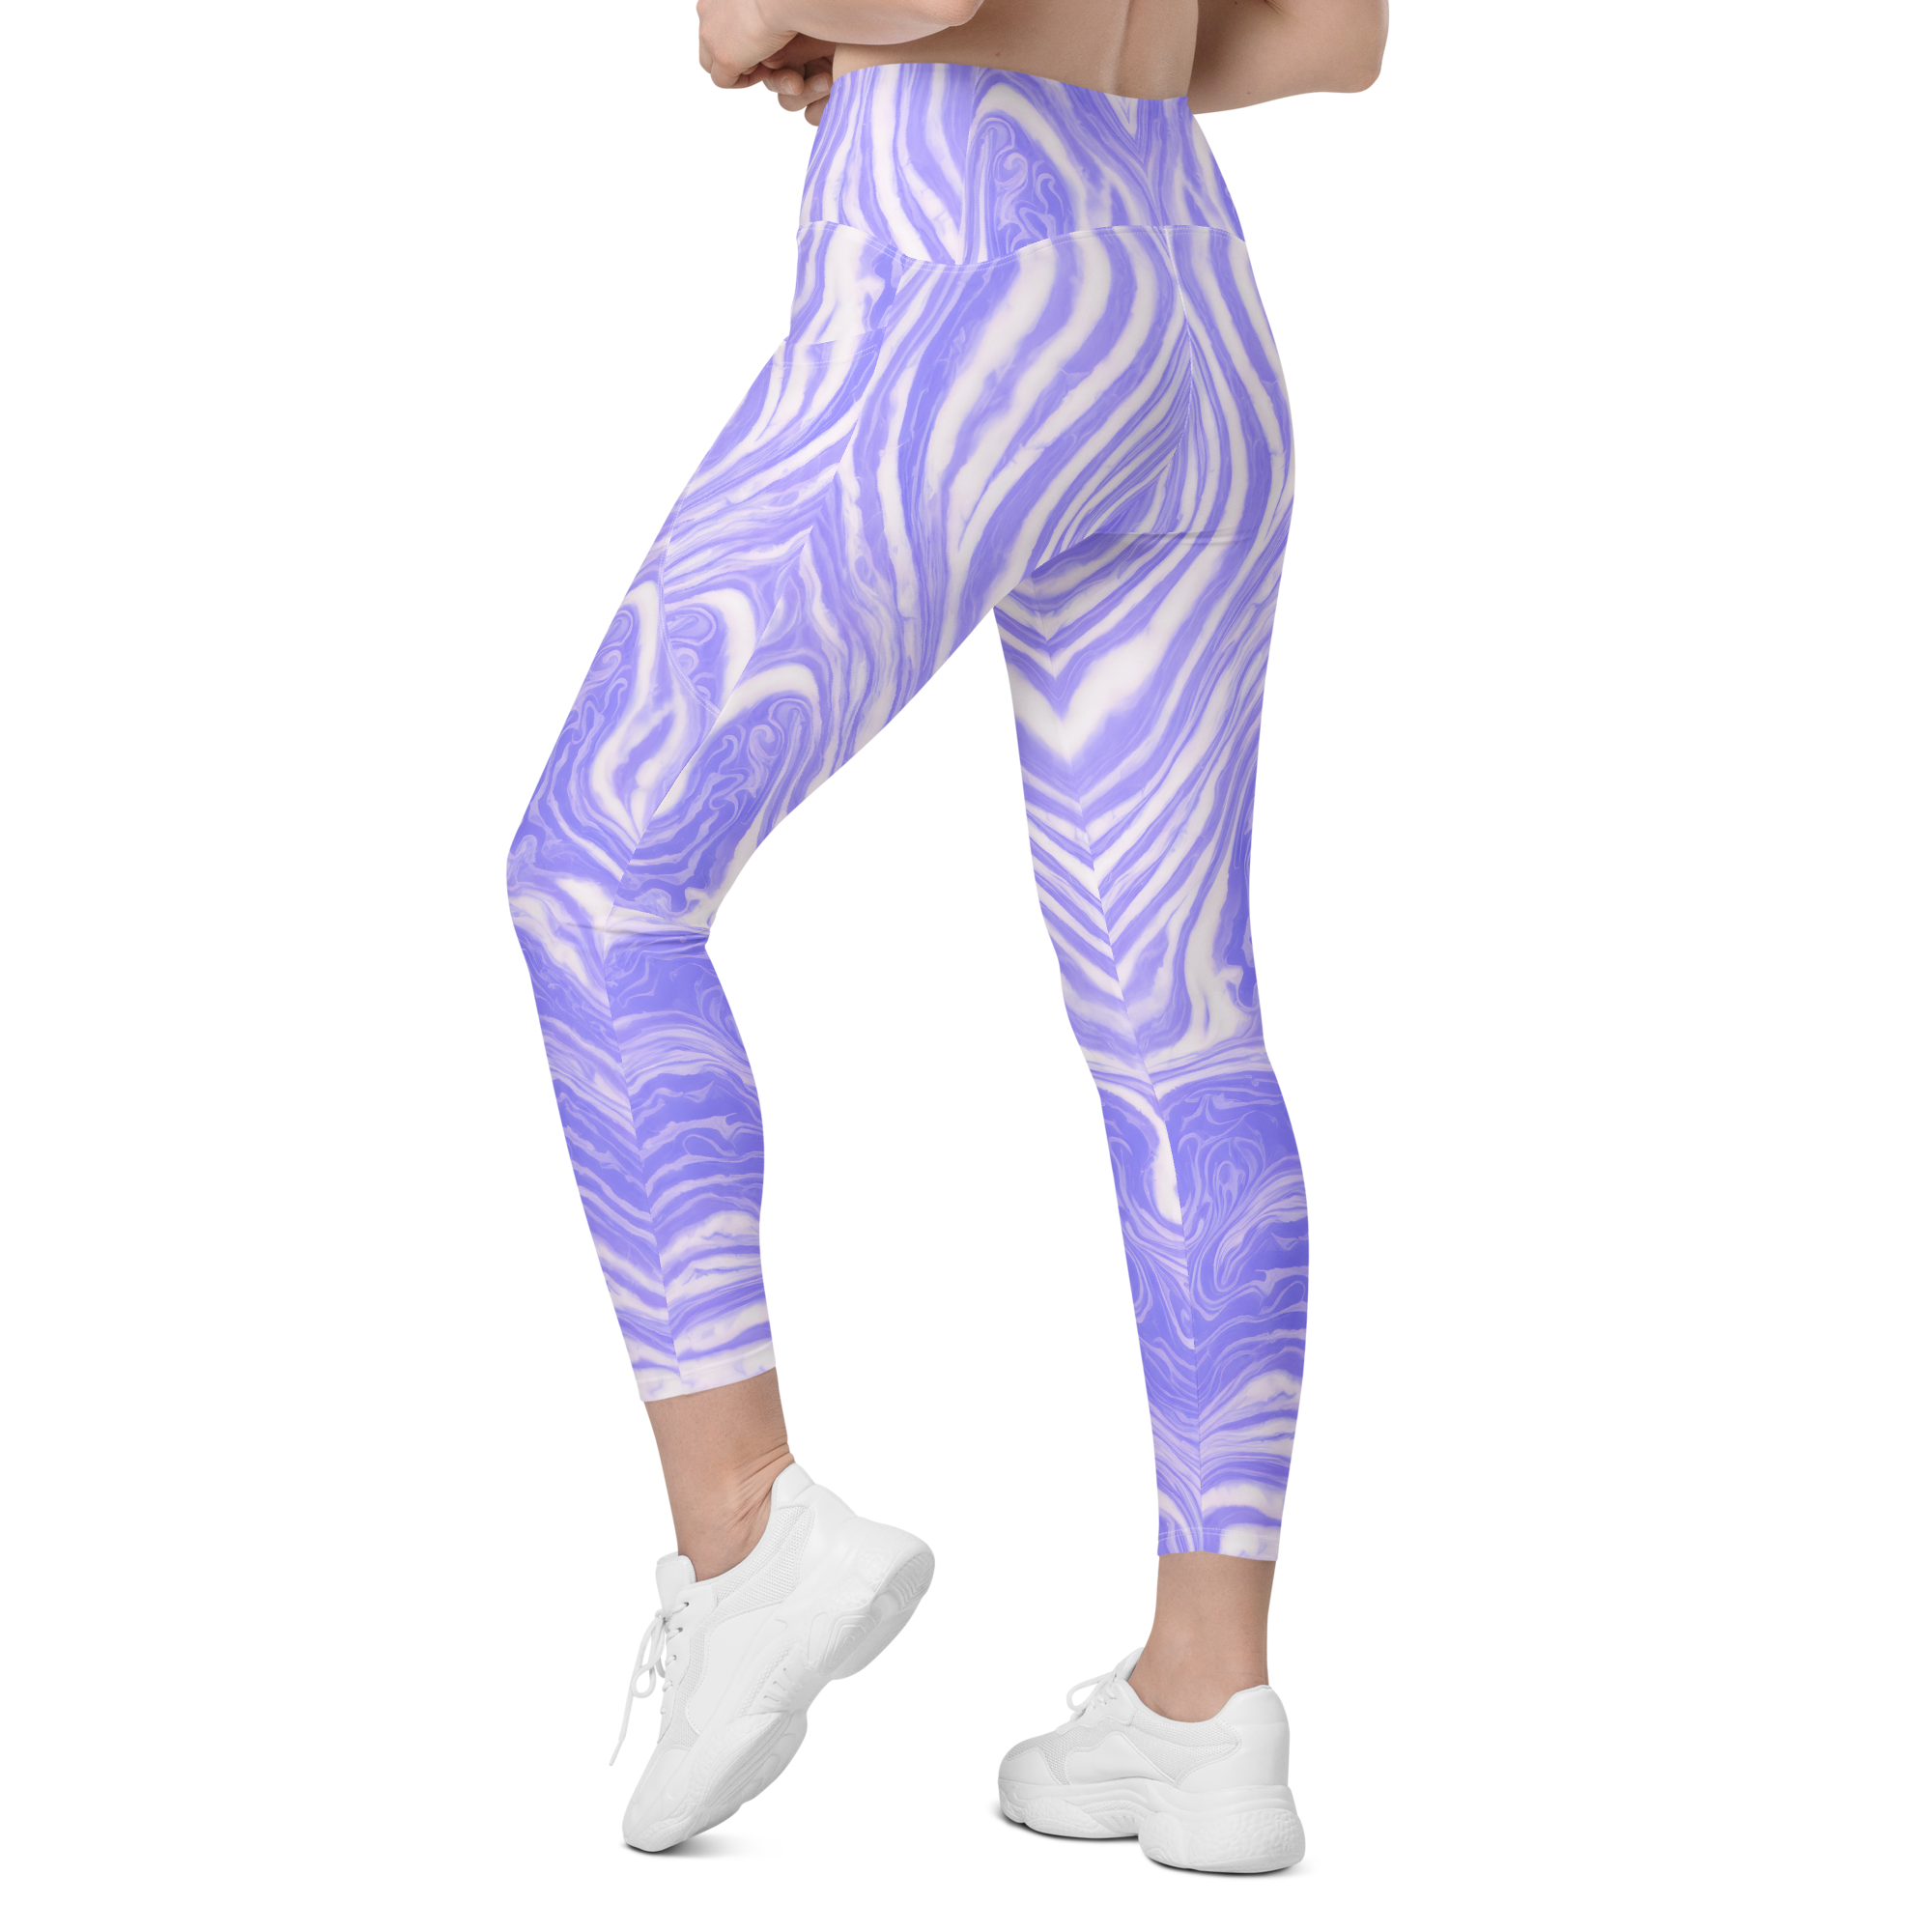 Just Dropped! Chakra 3 Leggings with pockets